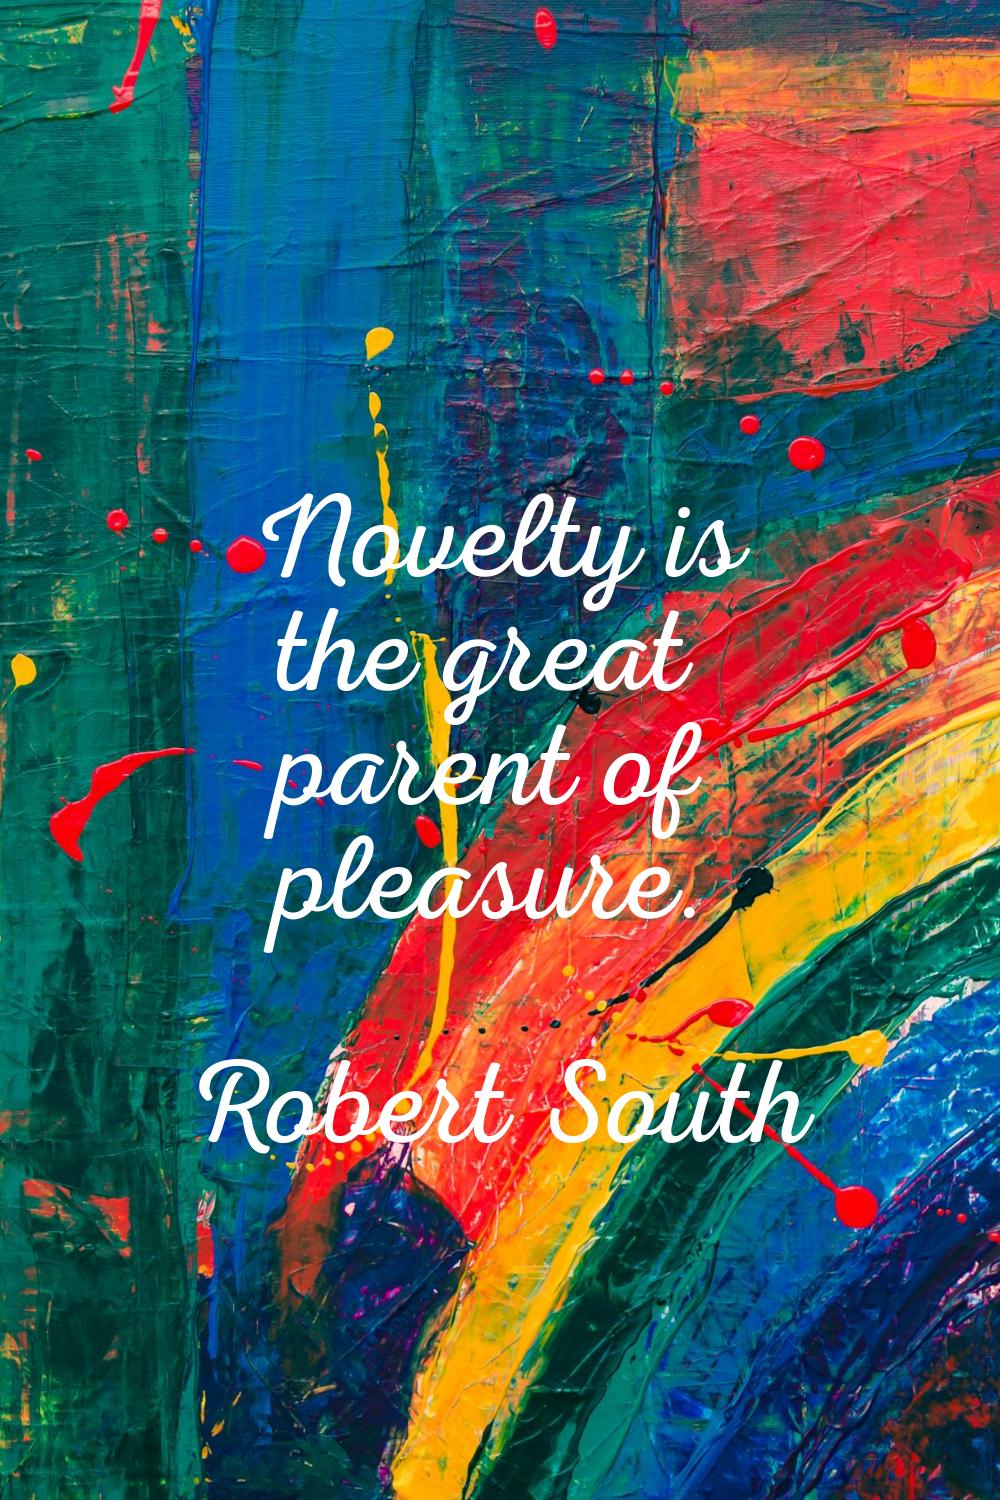 Novelty is the great parent of pleasure.